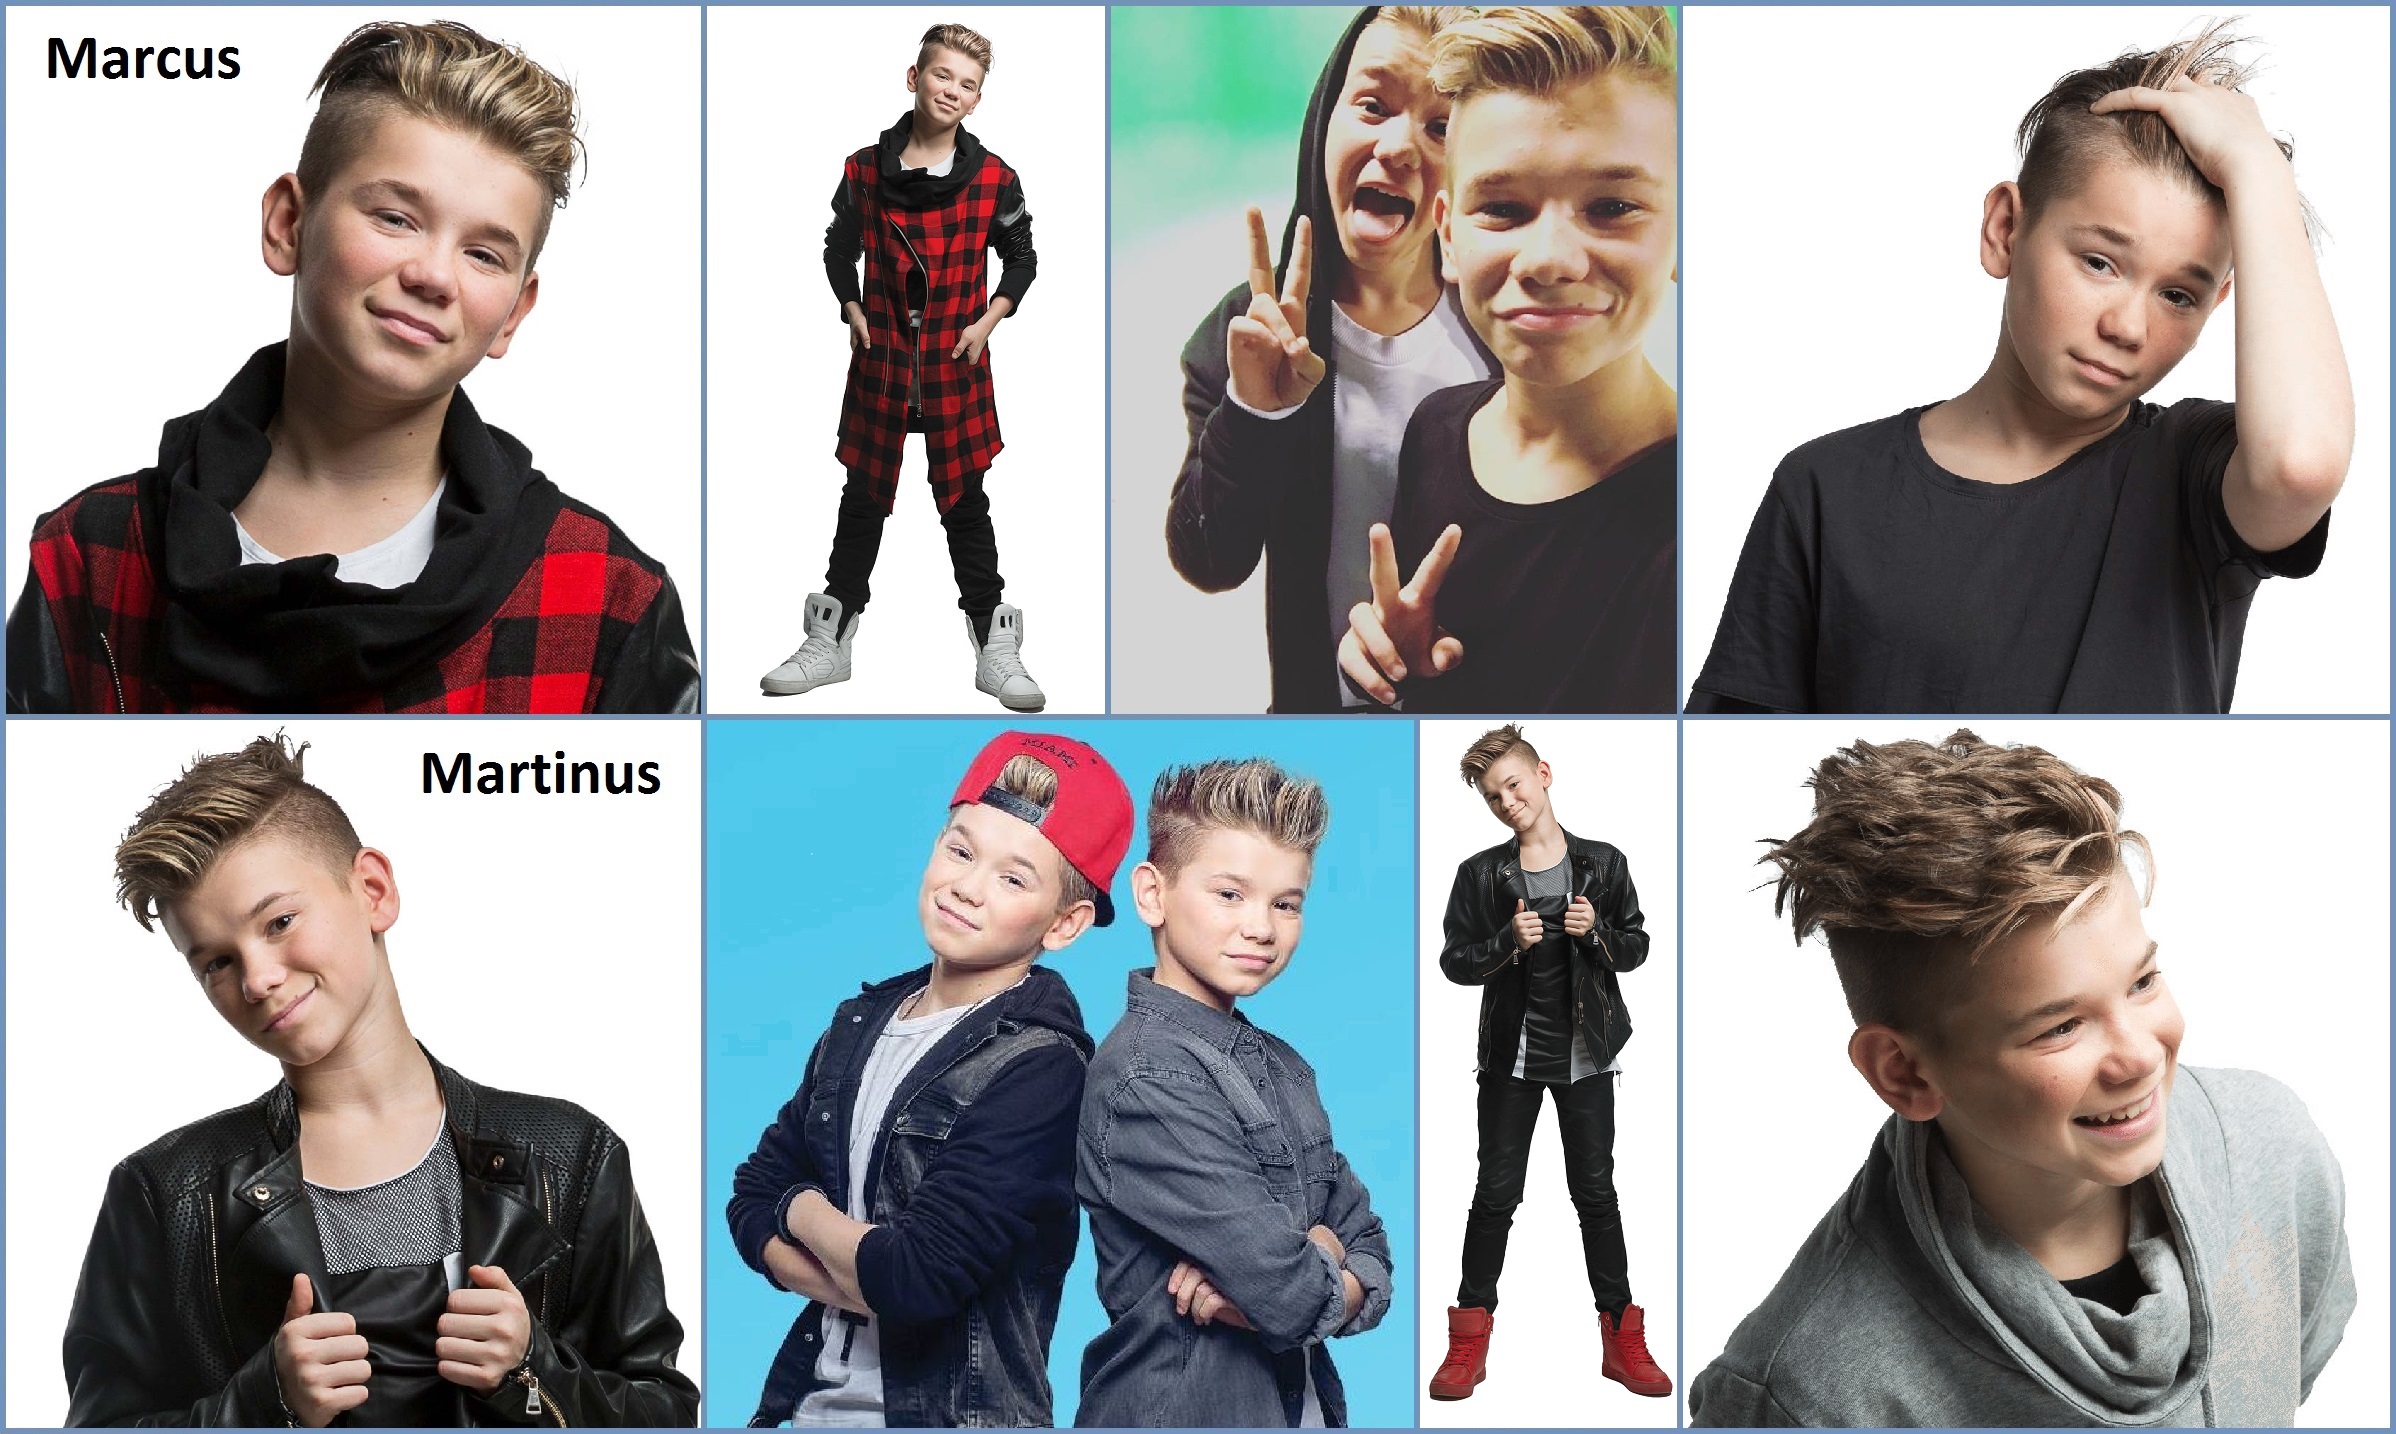 Marcus and Martinus in Fan Creations